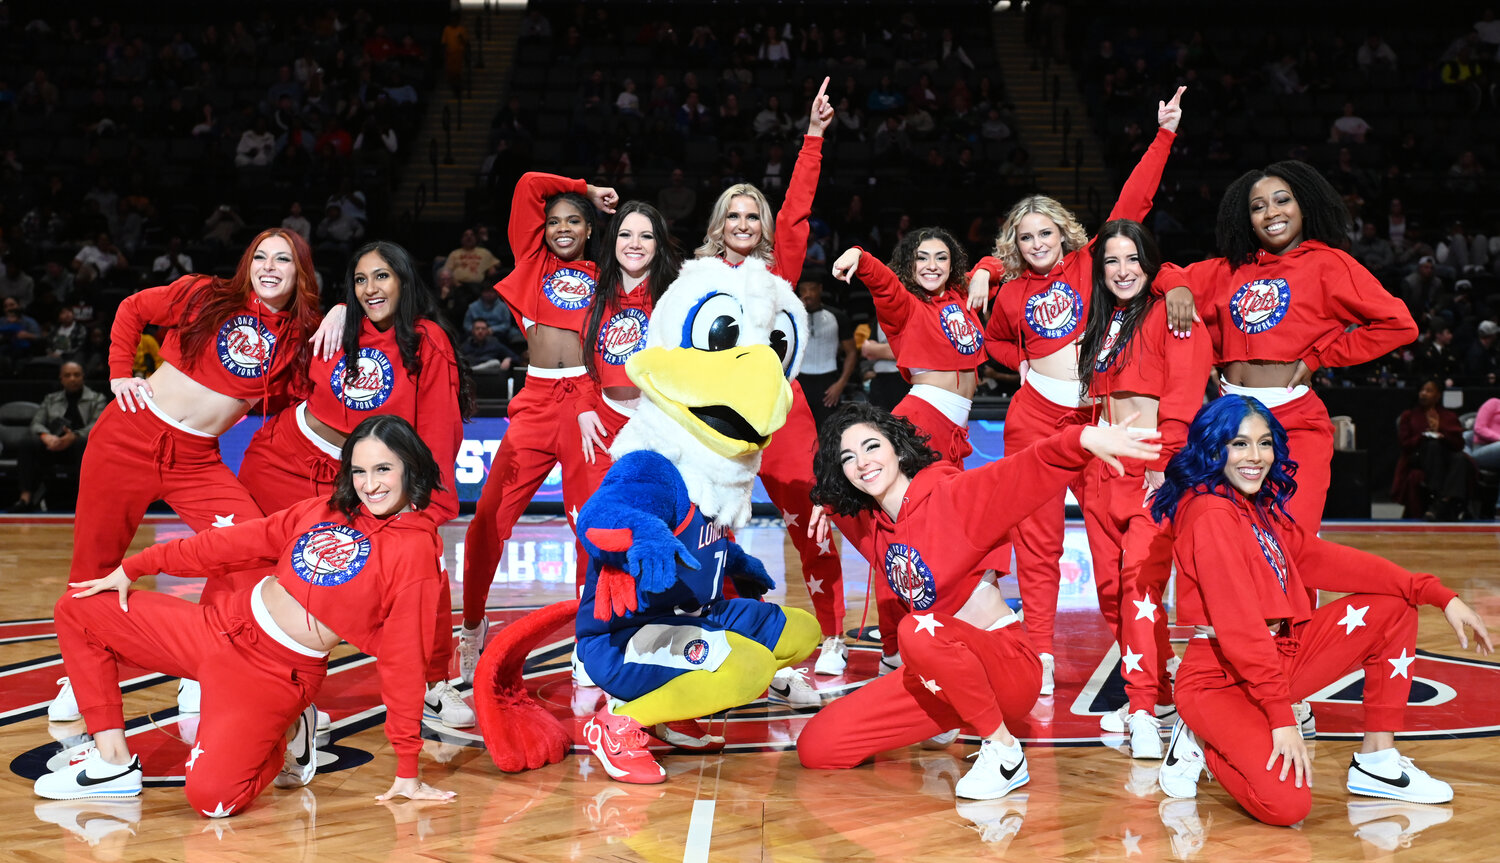 The Long Island Nets dance team and mascot Dale the Eagle have had plenty to celebrate in the early going with a 3-0 start.